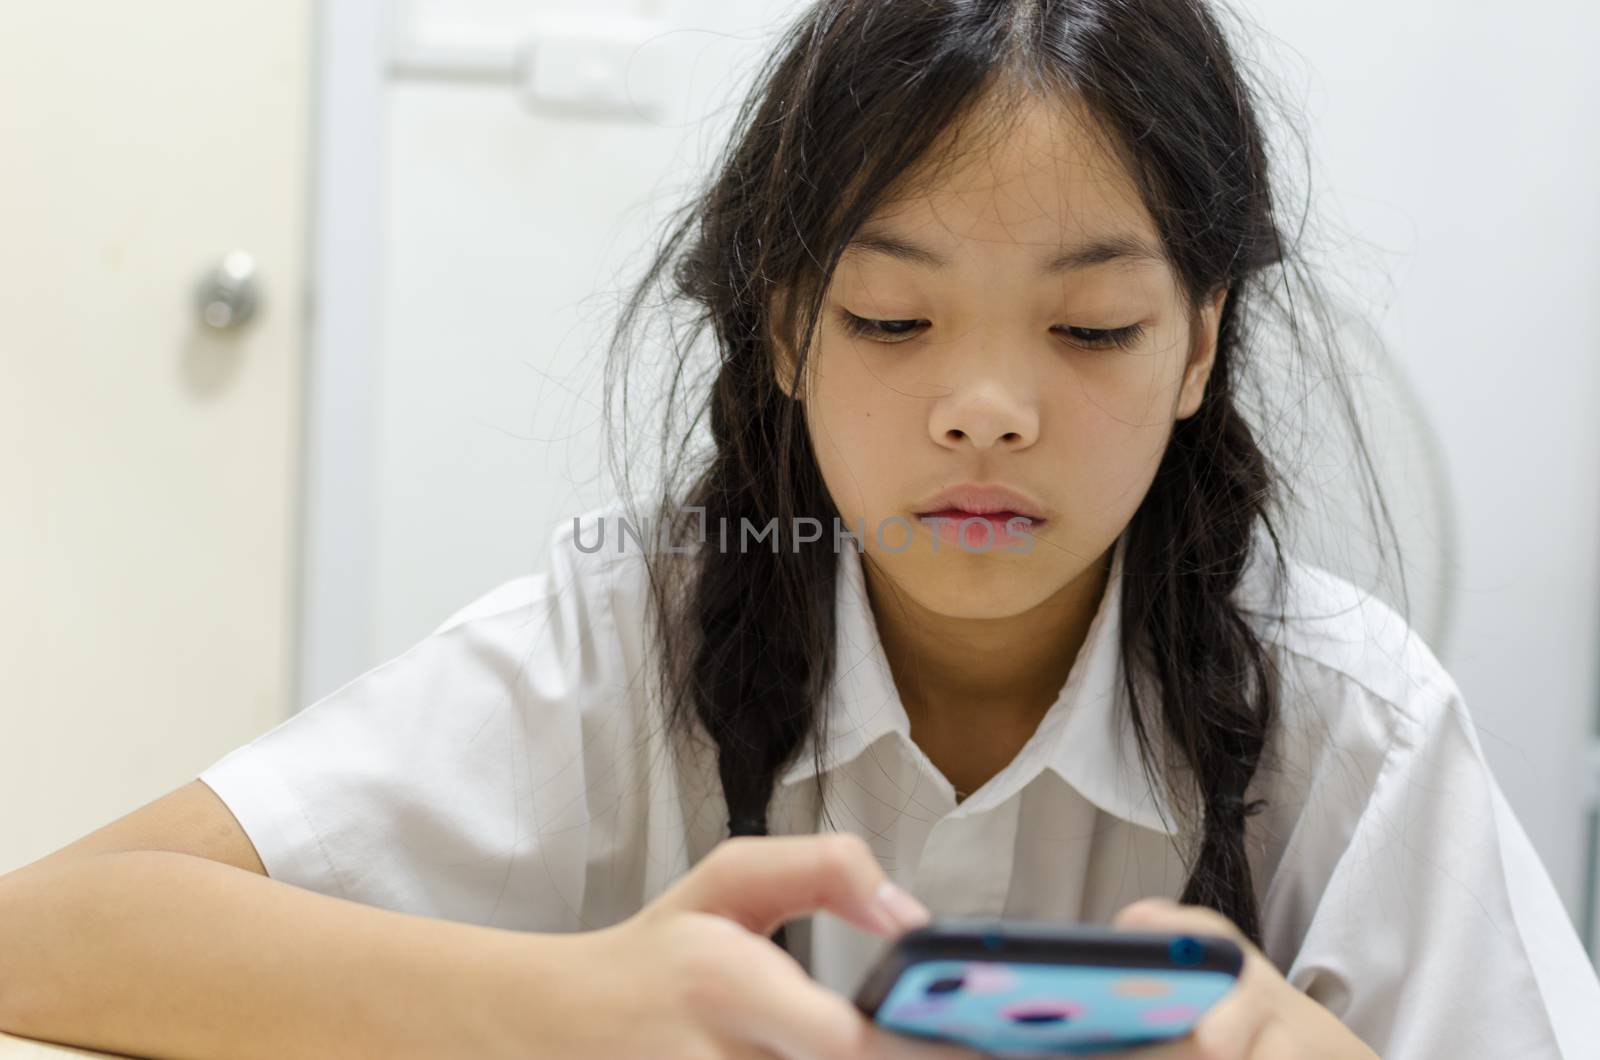 children addicted to phone games by aoo3771